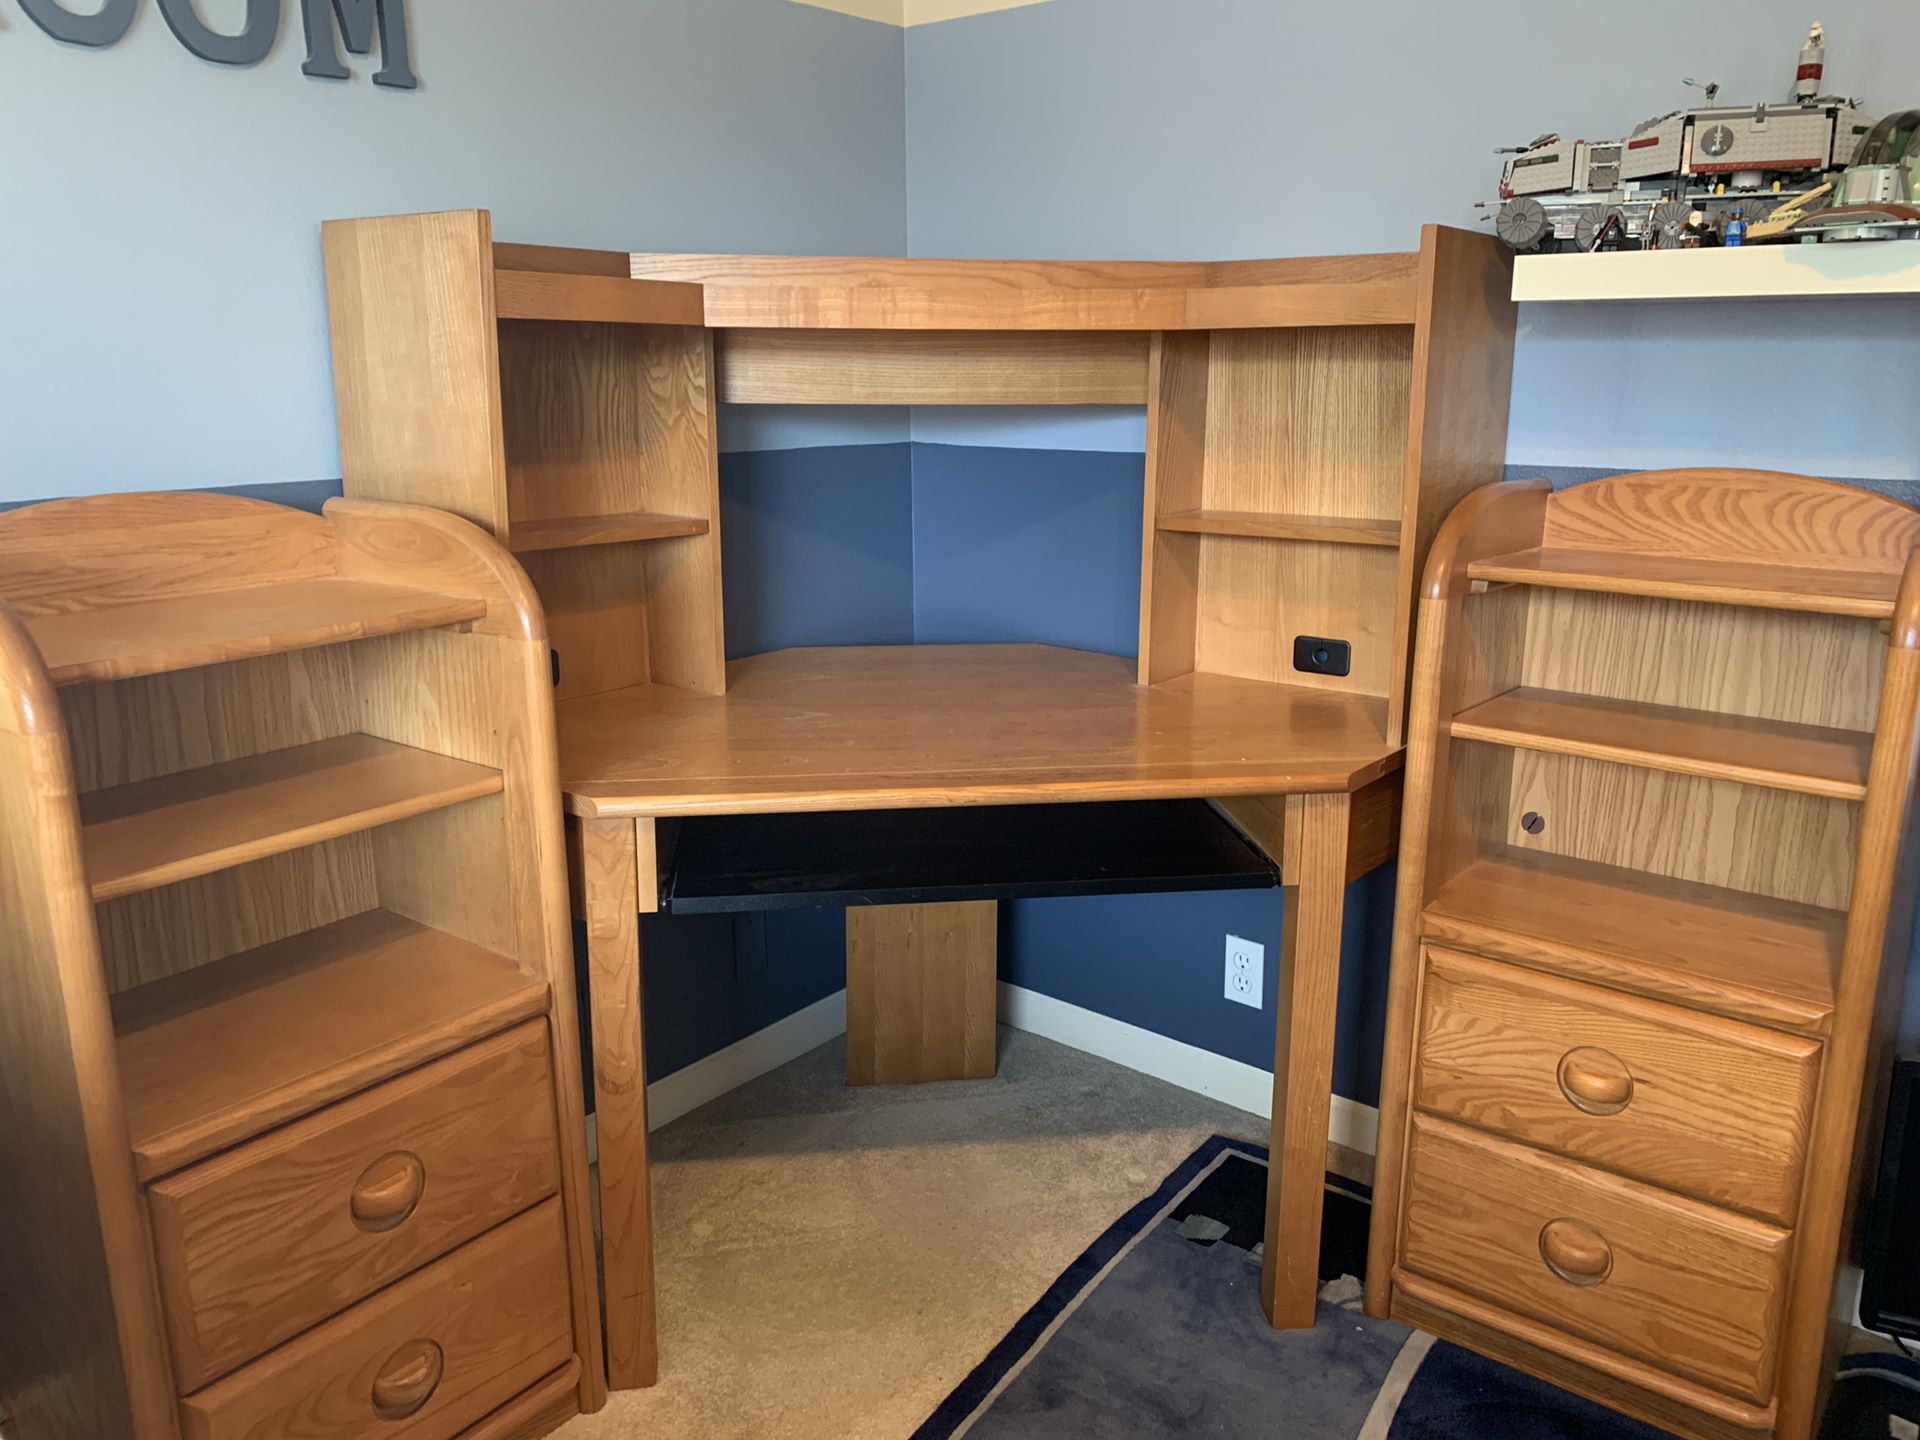 Solid oak bedroom set. Corner desk, 2 drawer stacks, chair and headboard. Very well made and in perfect shape.